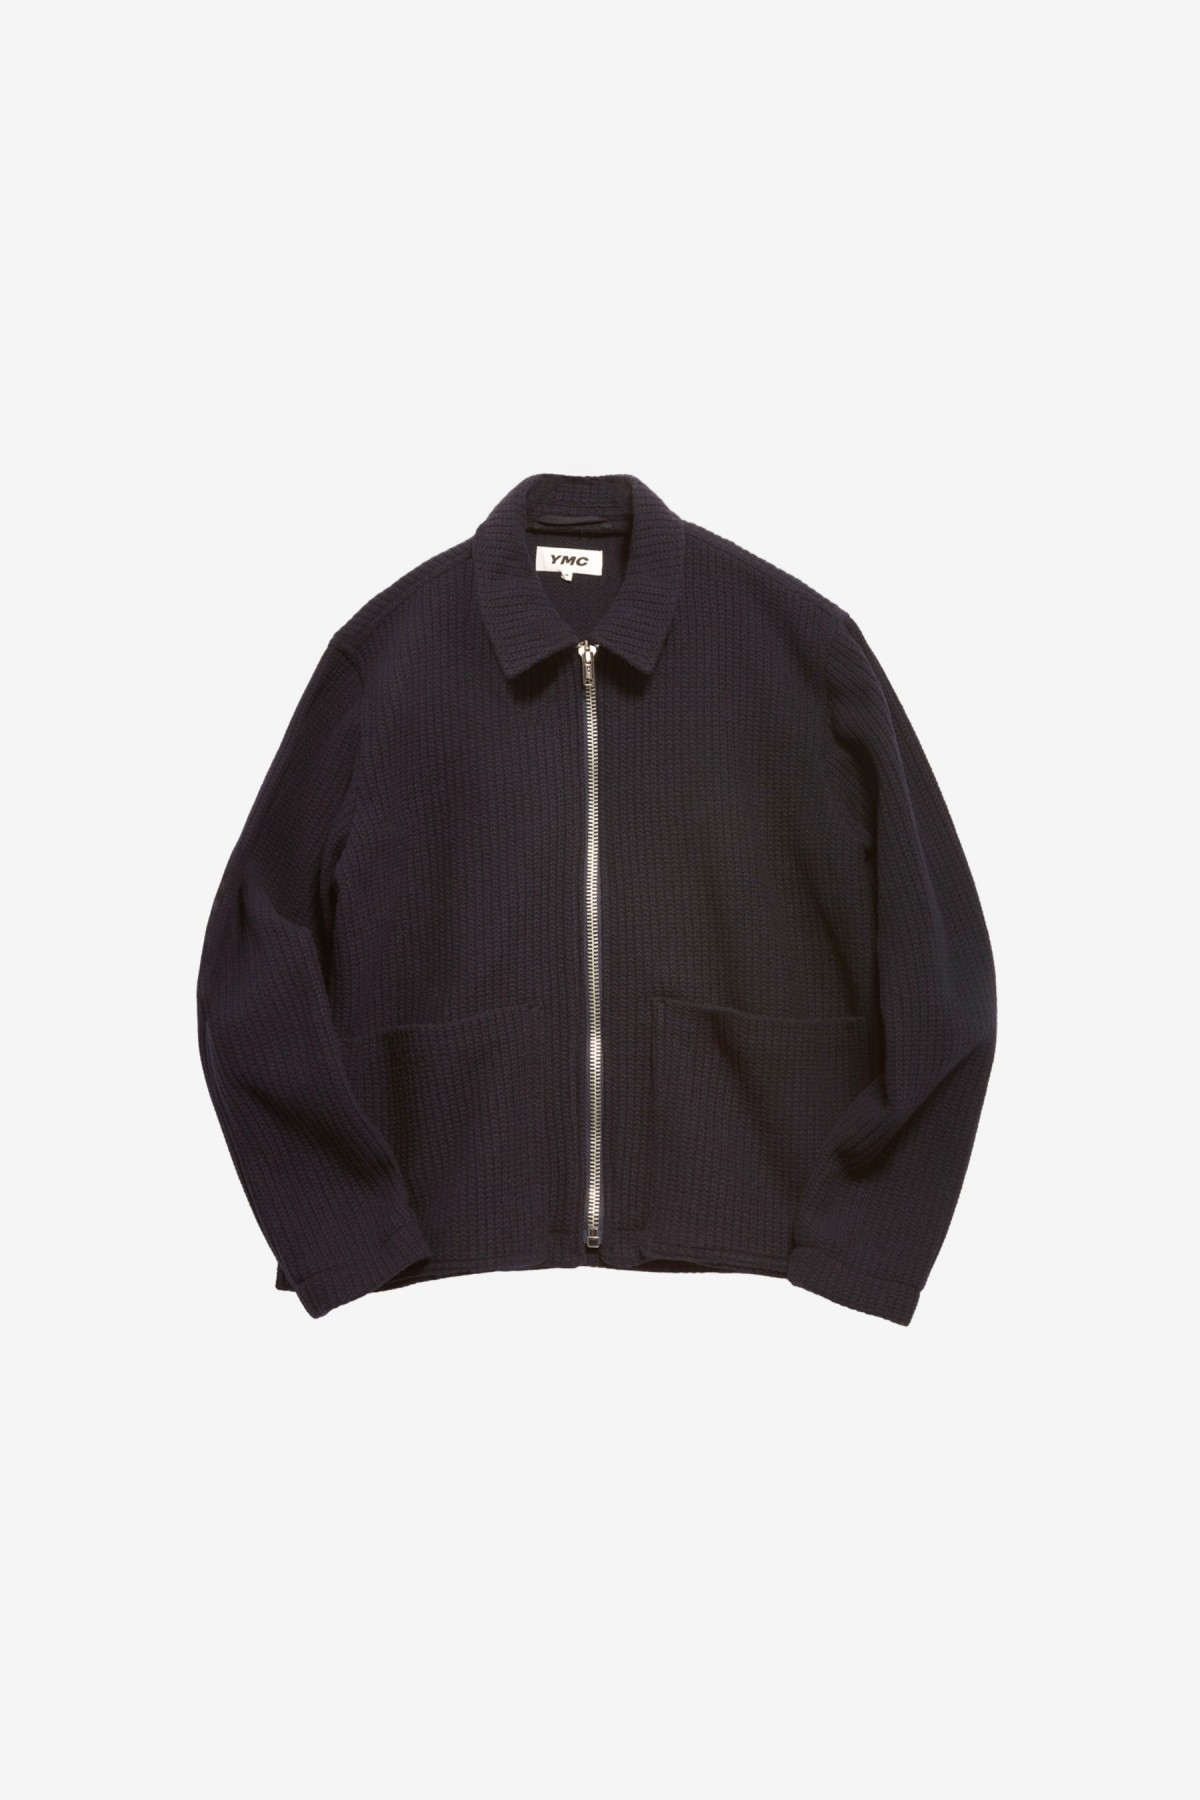 YMC You Must Create Bay City Bomber Jacket in Navy